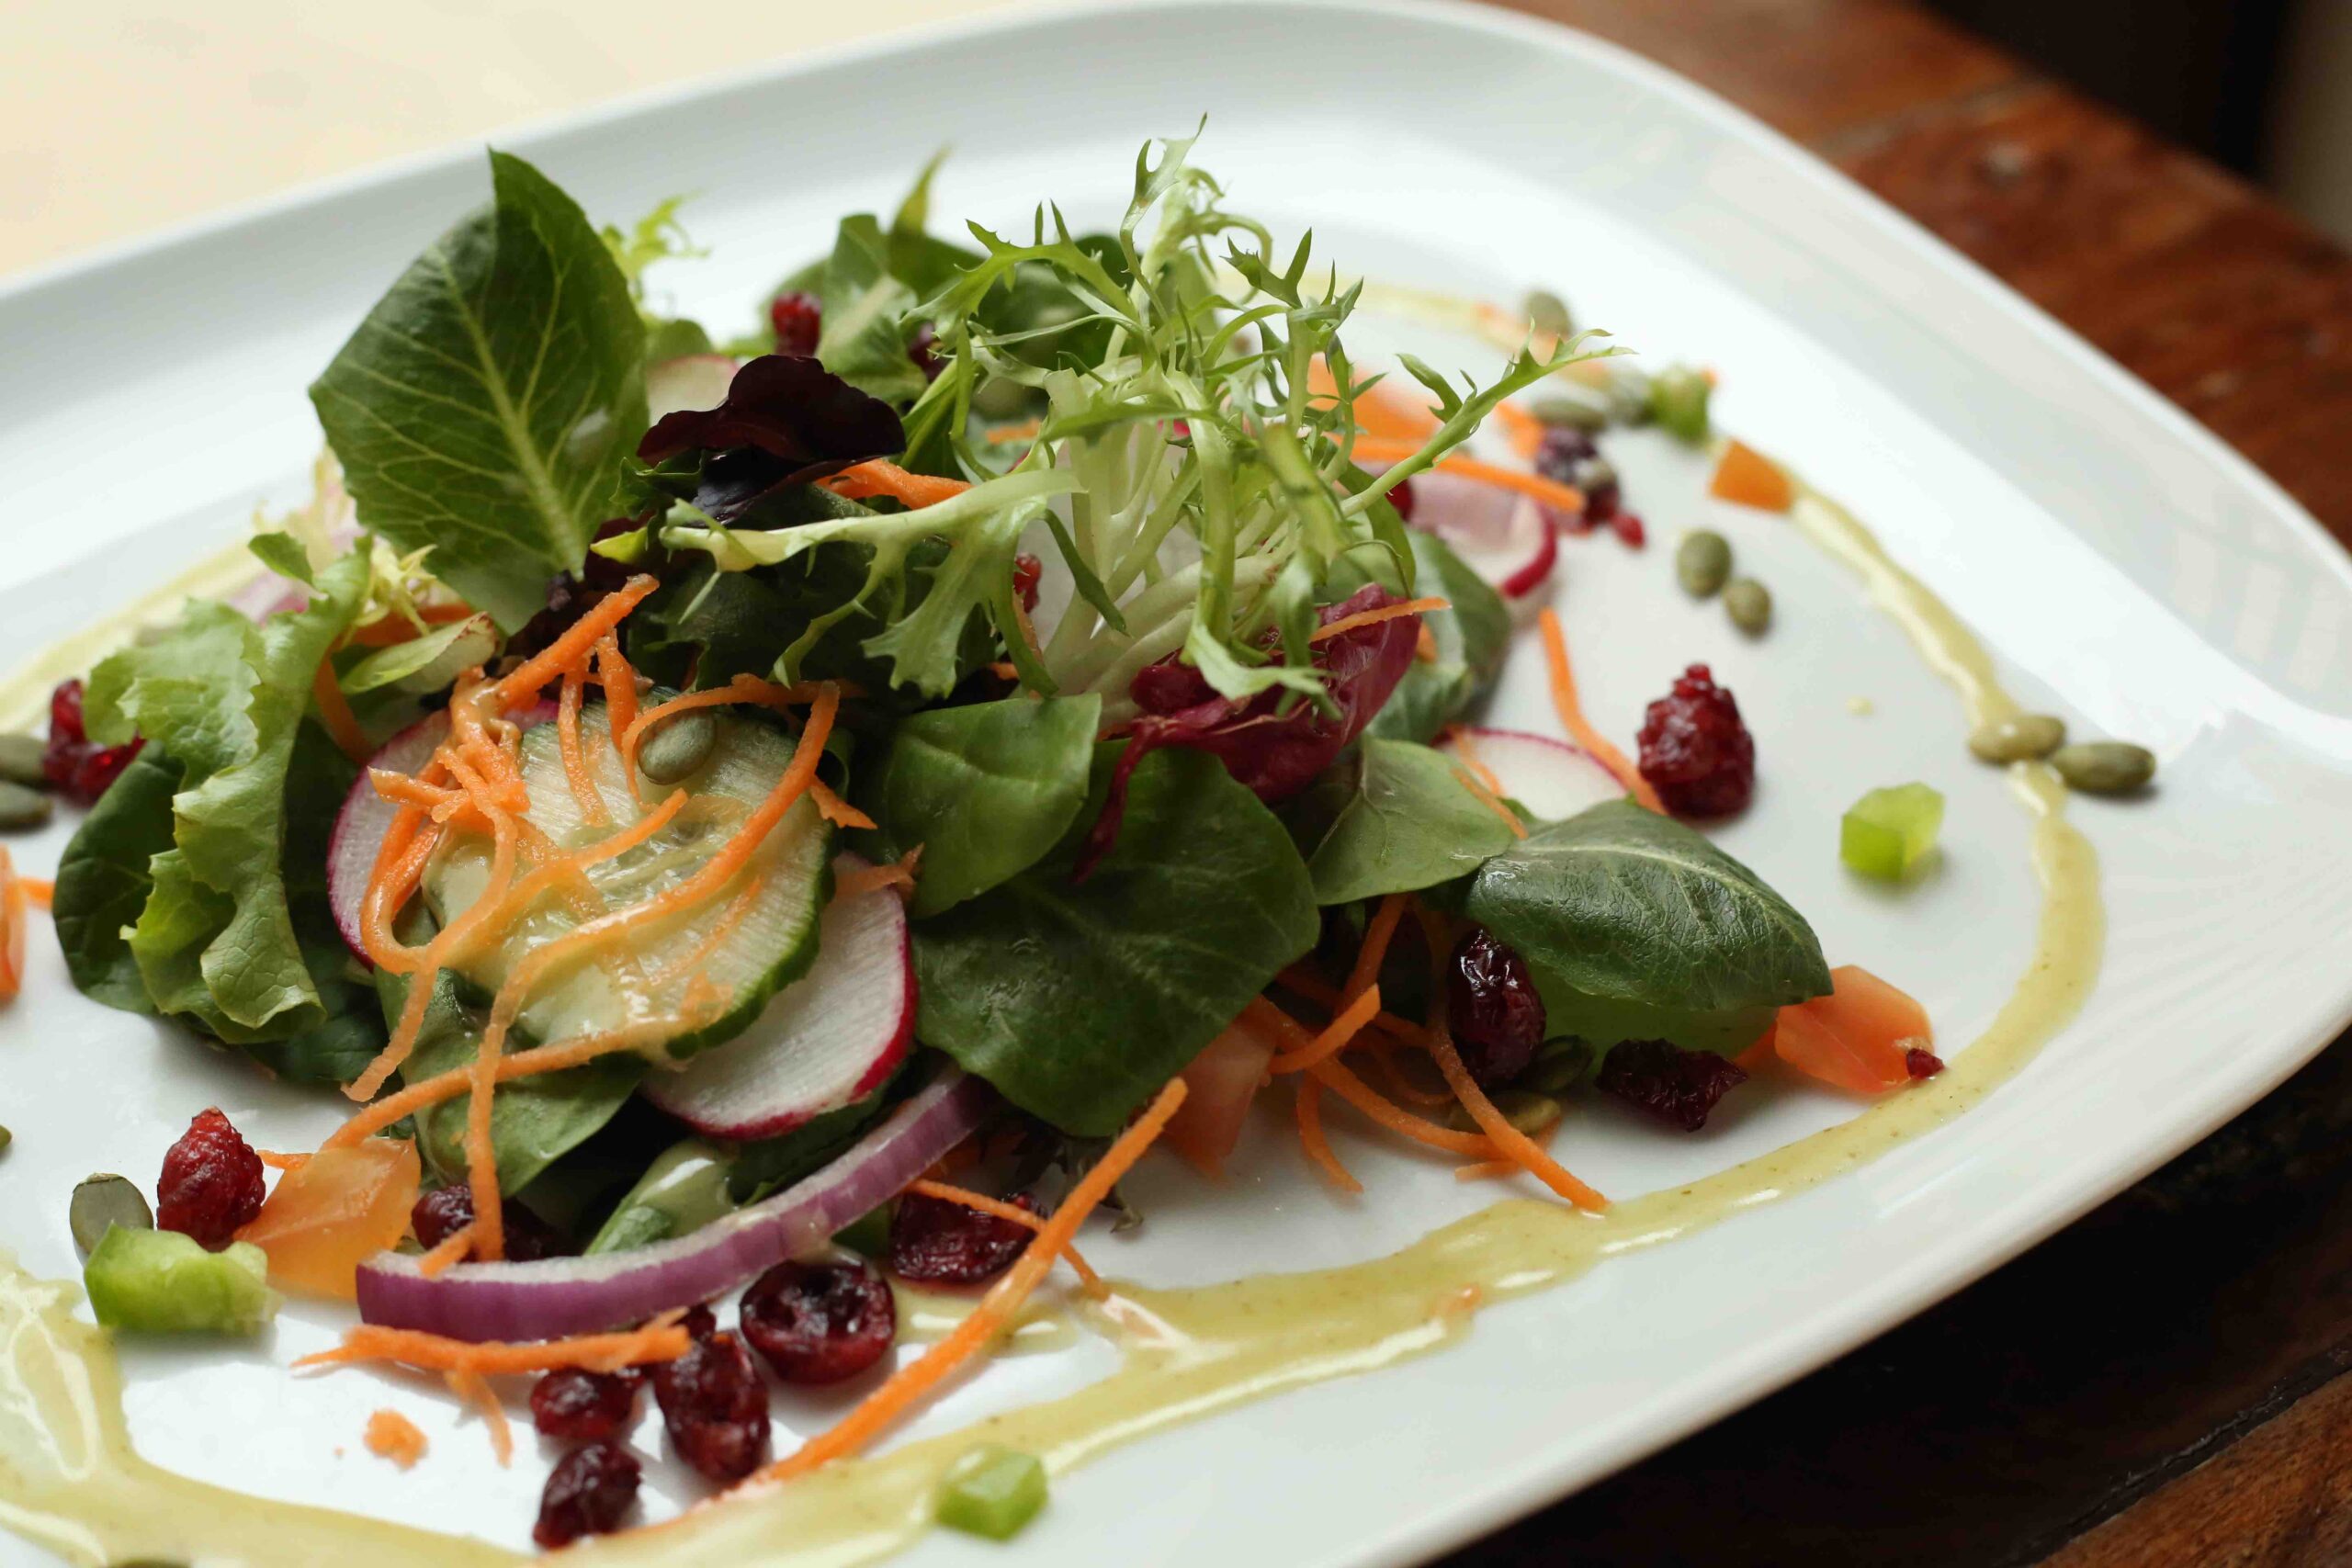 A mixed vegetable salad with a dressing drizzled along the edges of a white plate